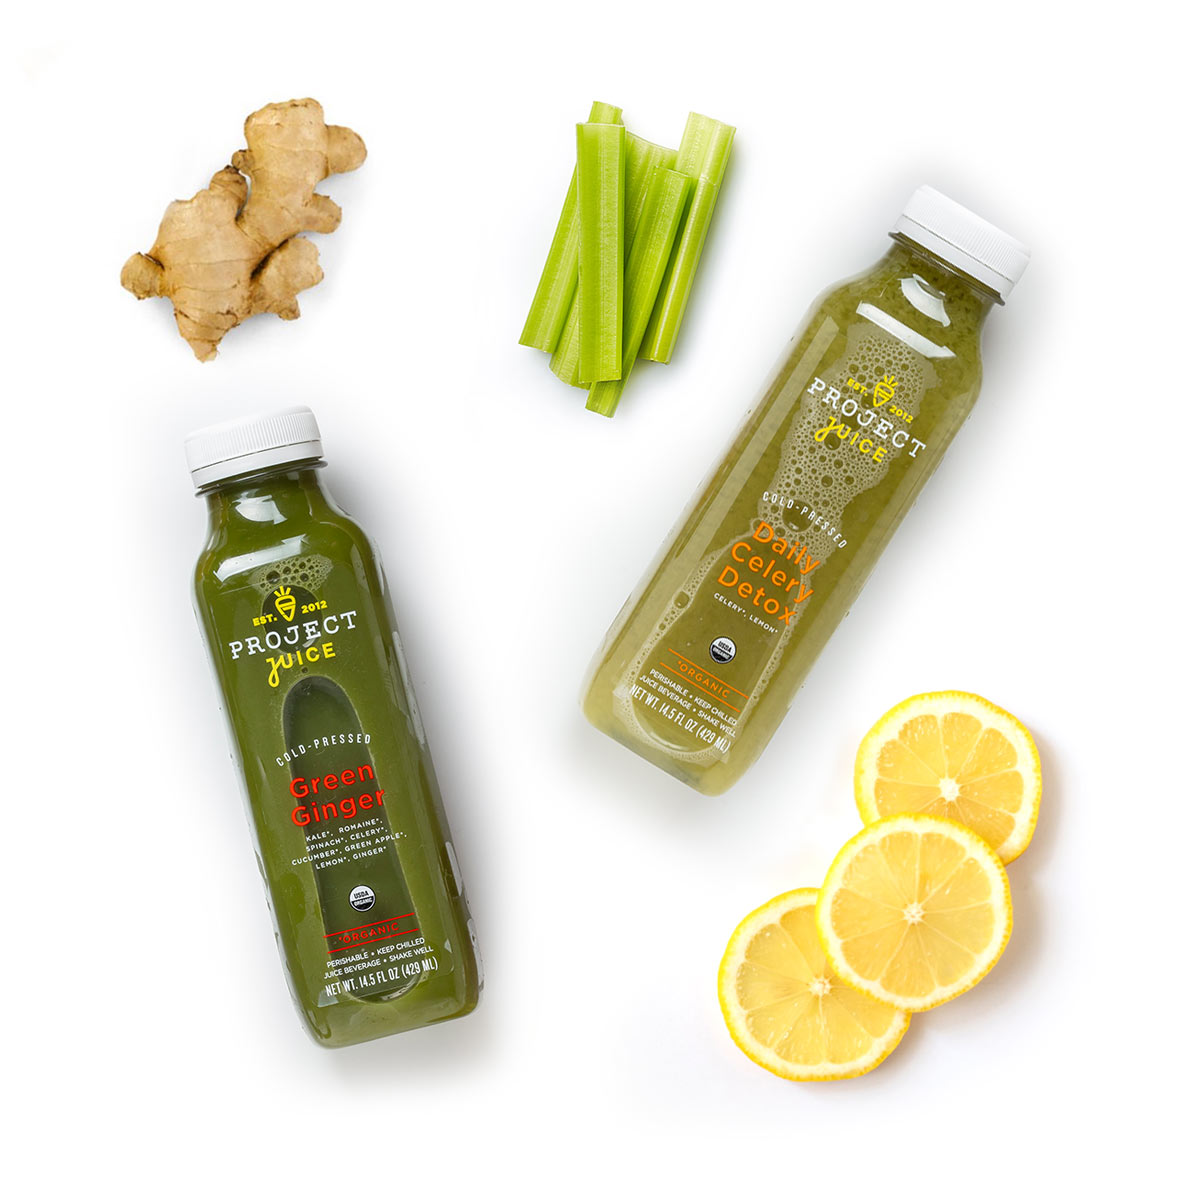 Green Ginger and Daily Celery Detox